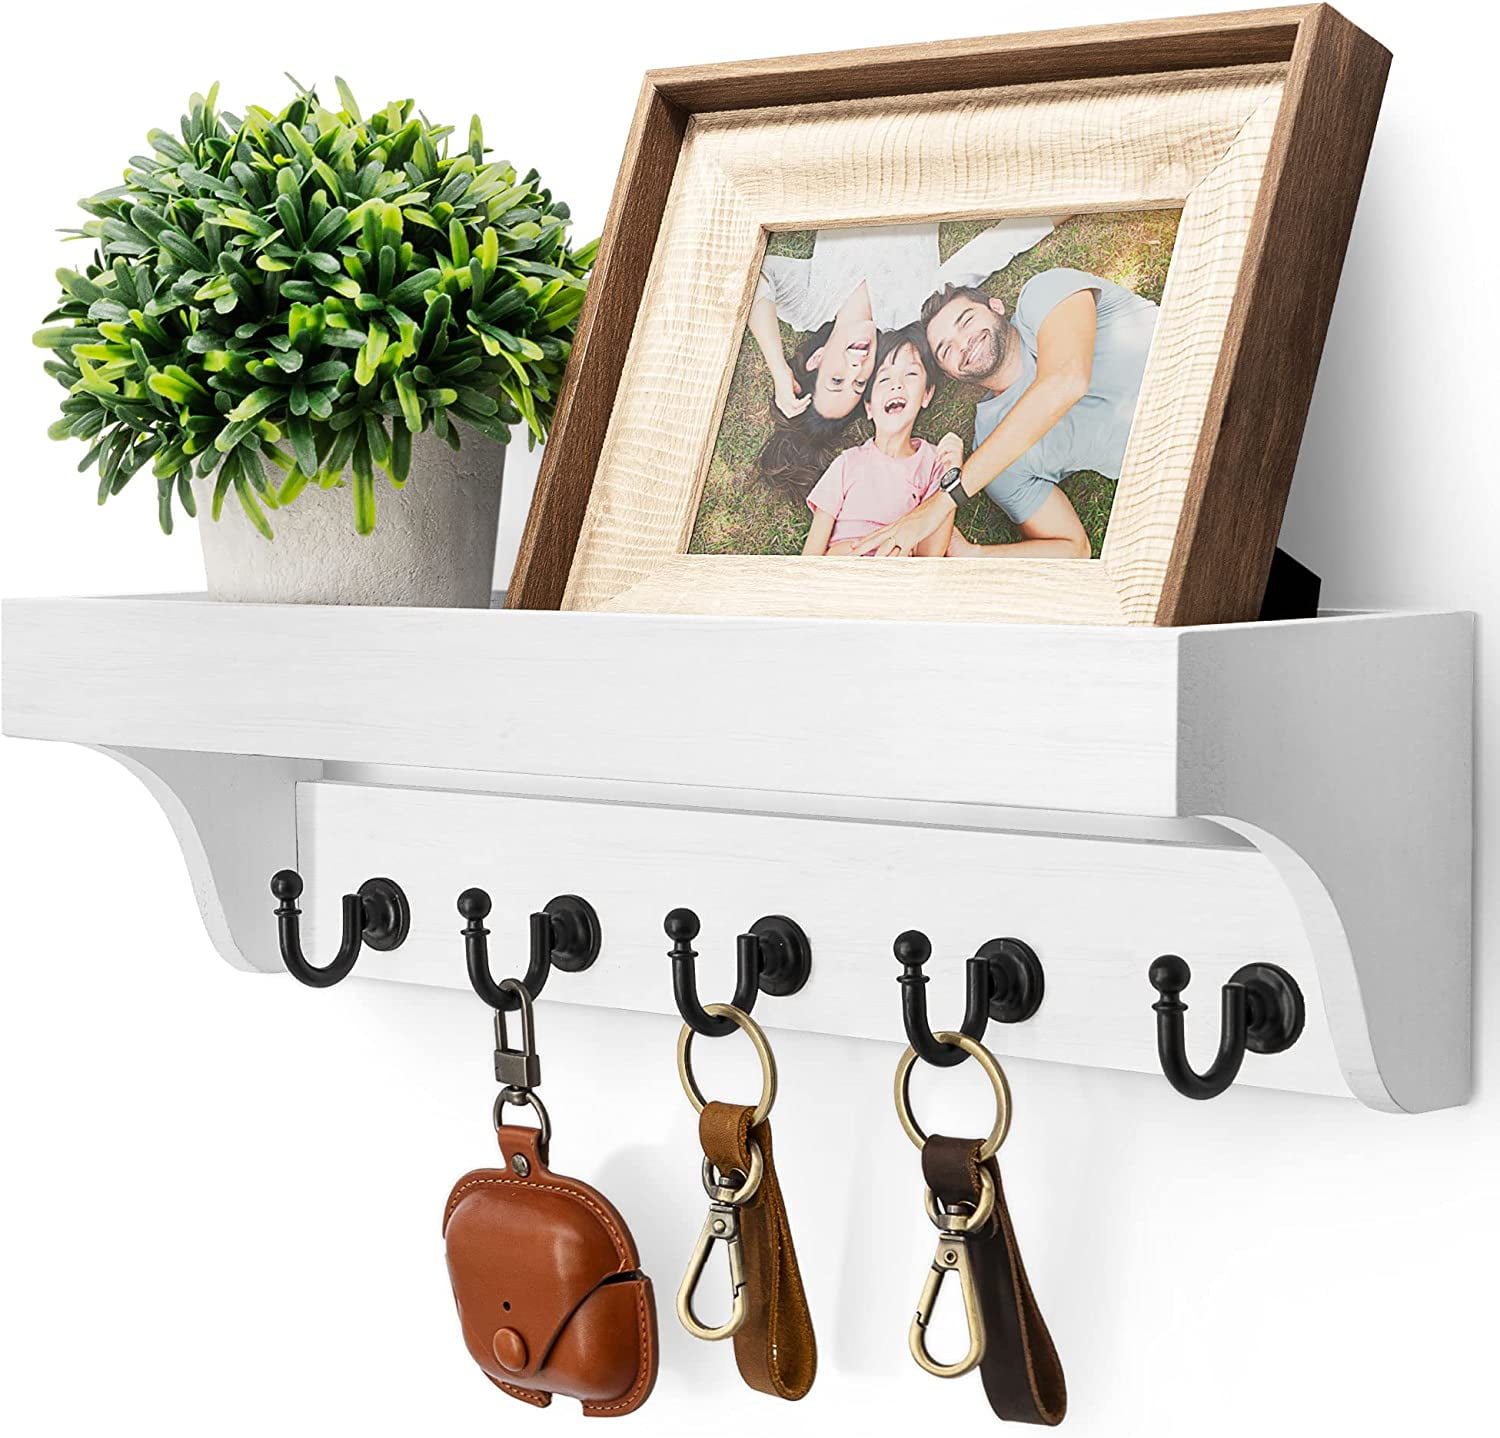 The Handmade Entryway Wall Organizer with Coat and Key Hooks